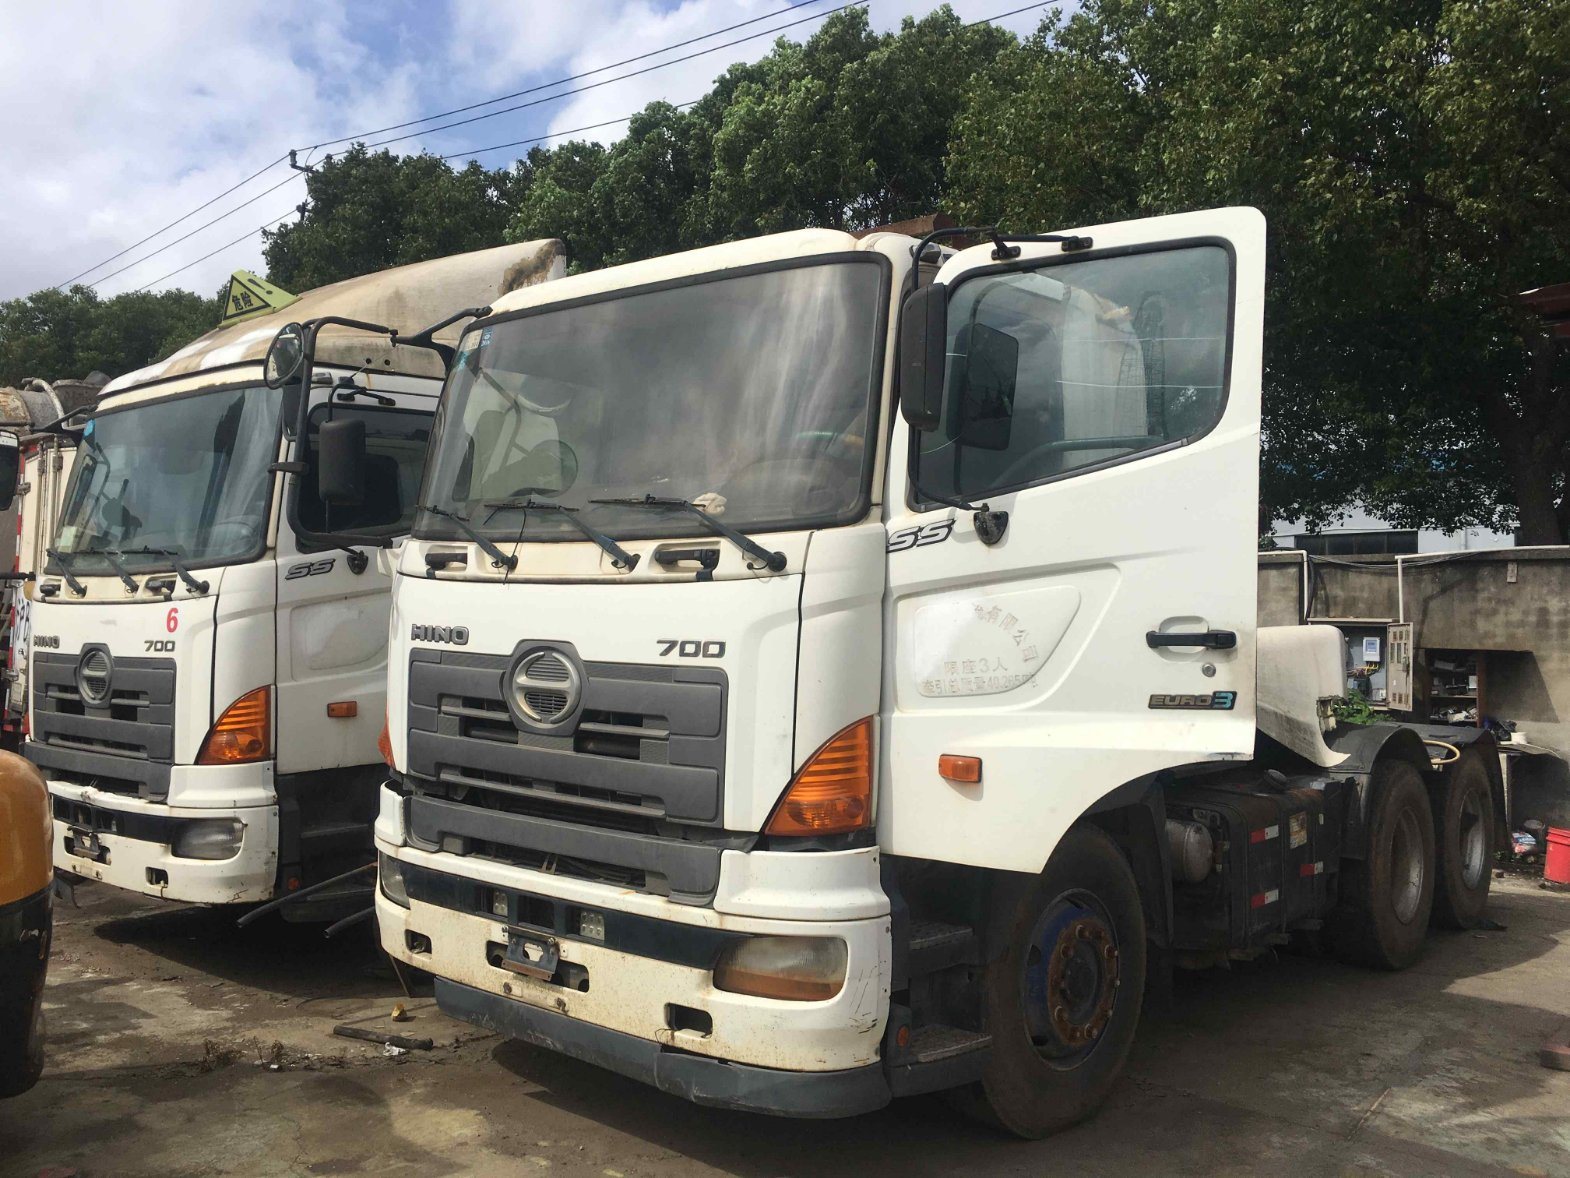 Used Hino 700 Dump Truck in High Quality with Good Condition in Cheap Price